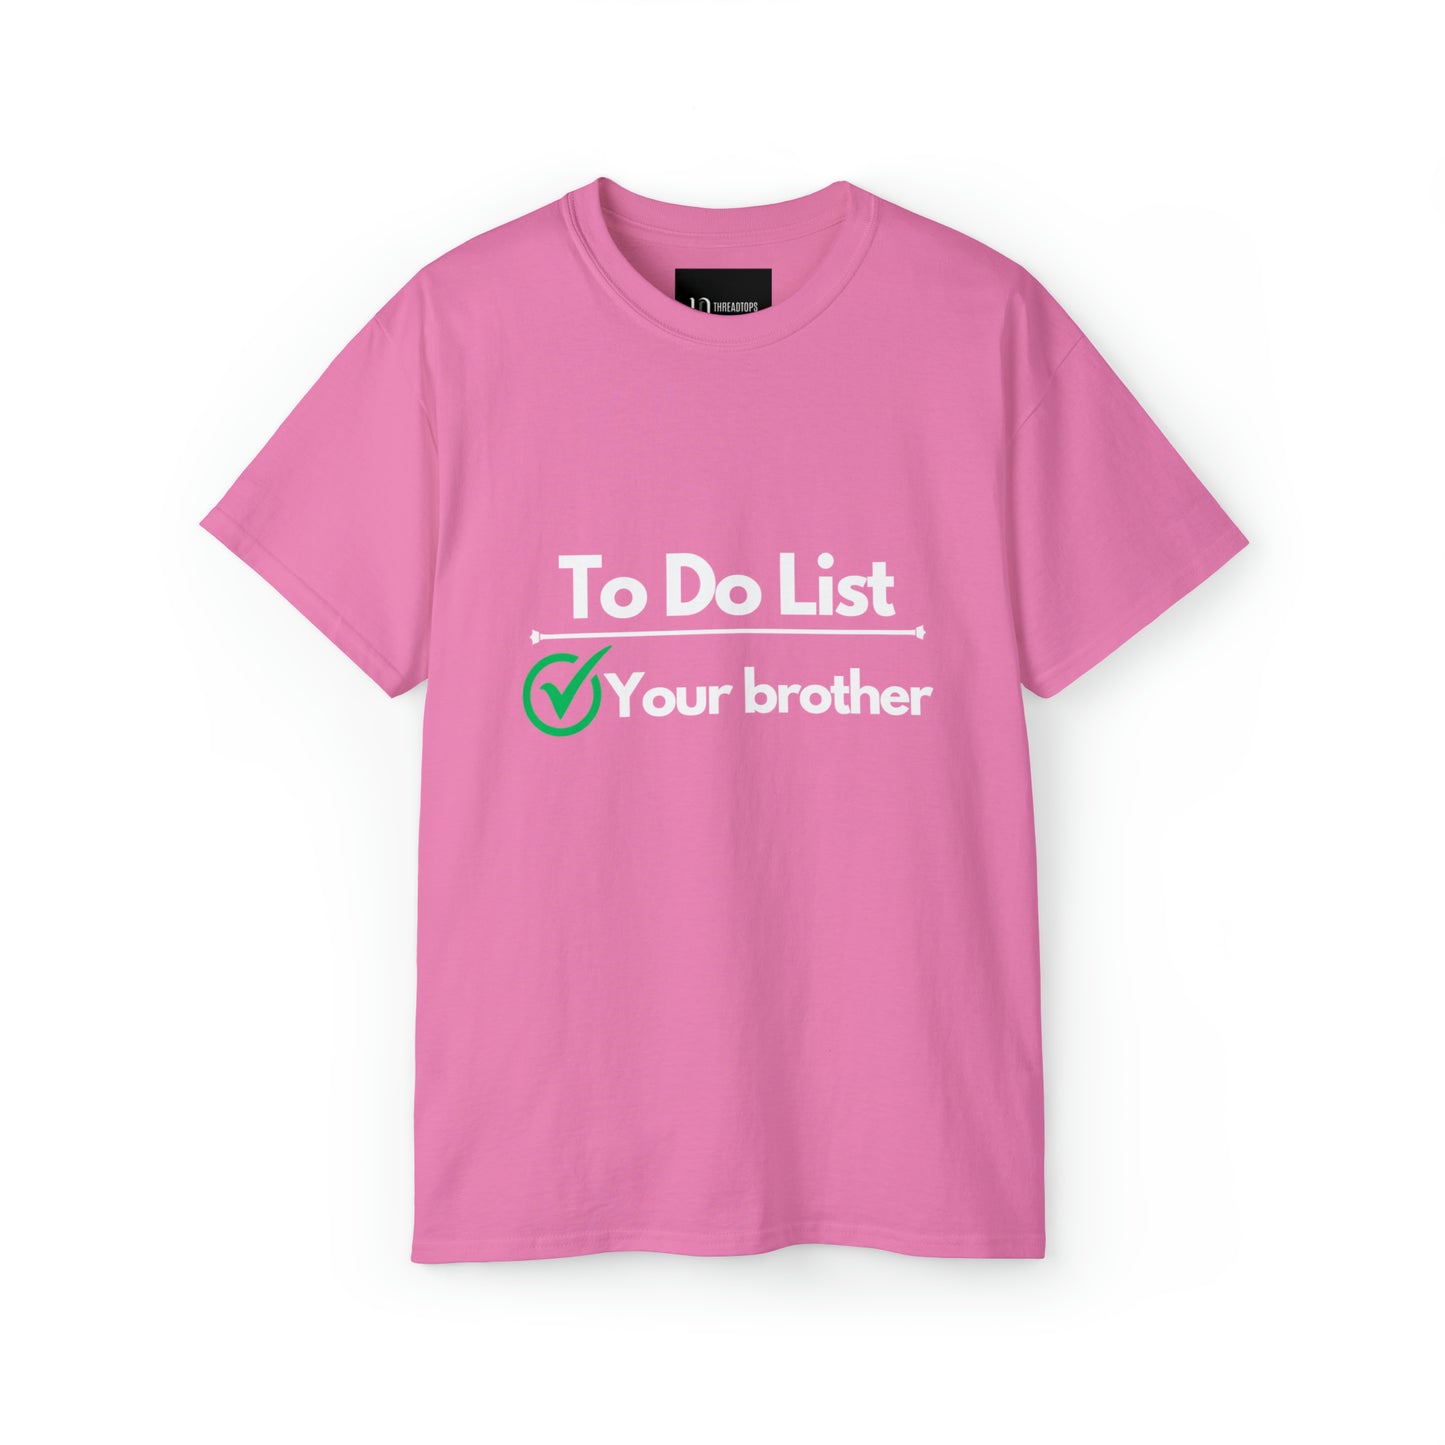 To do list your brother | Tee